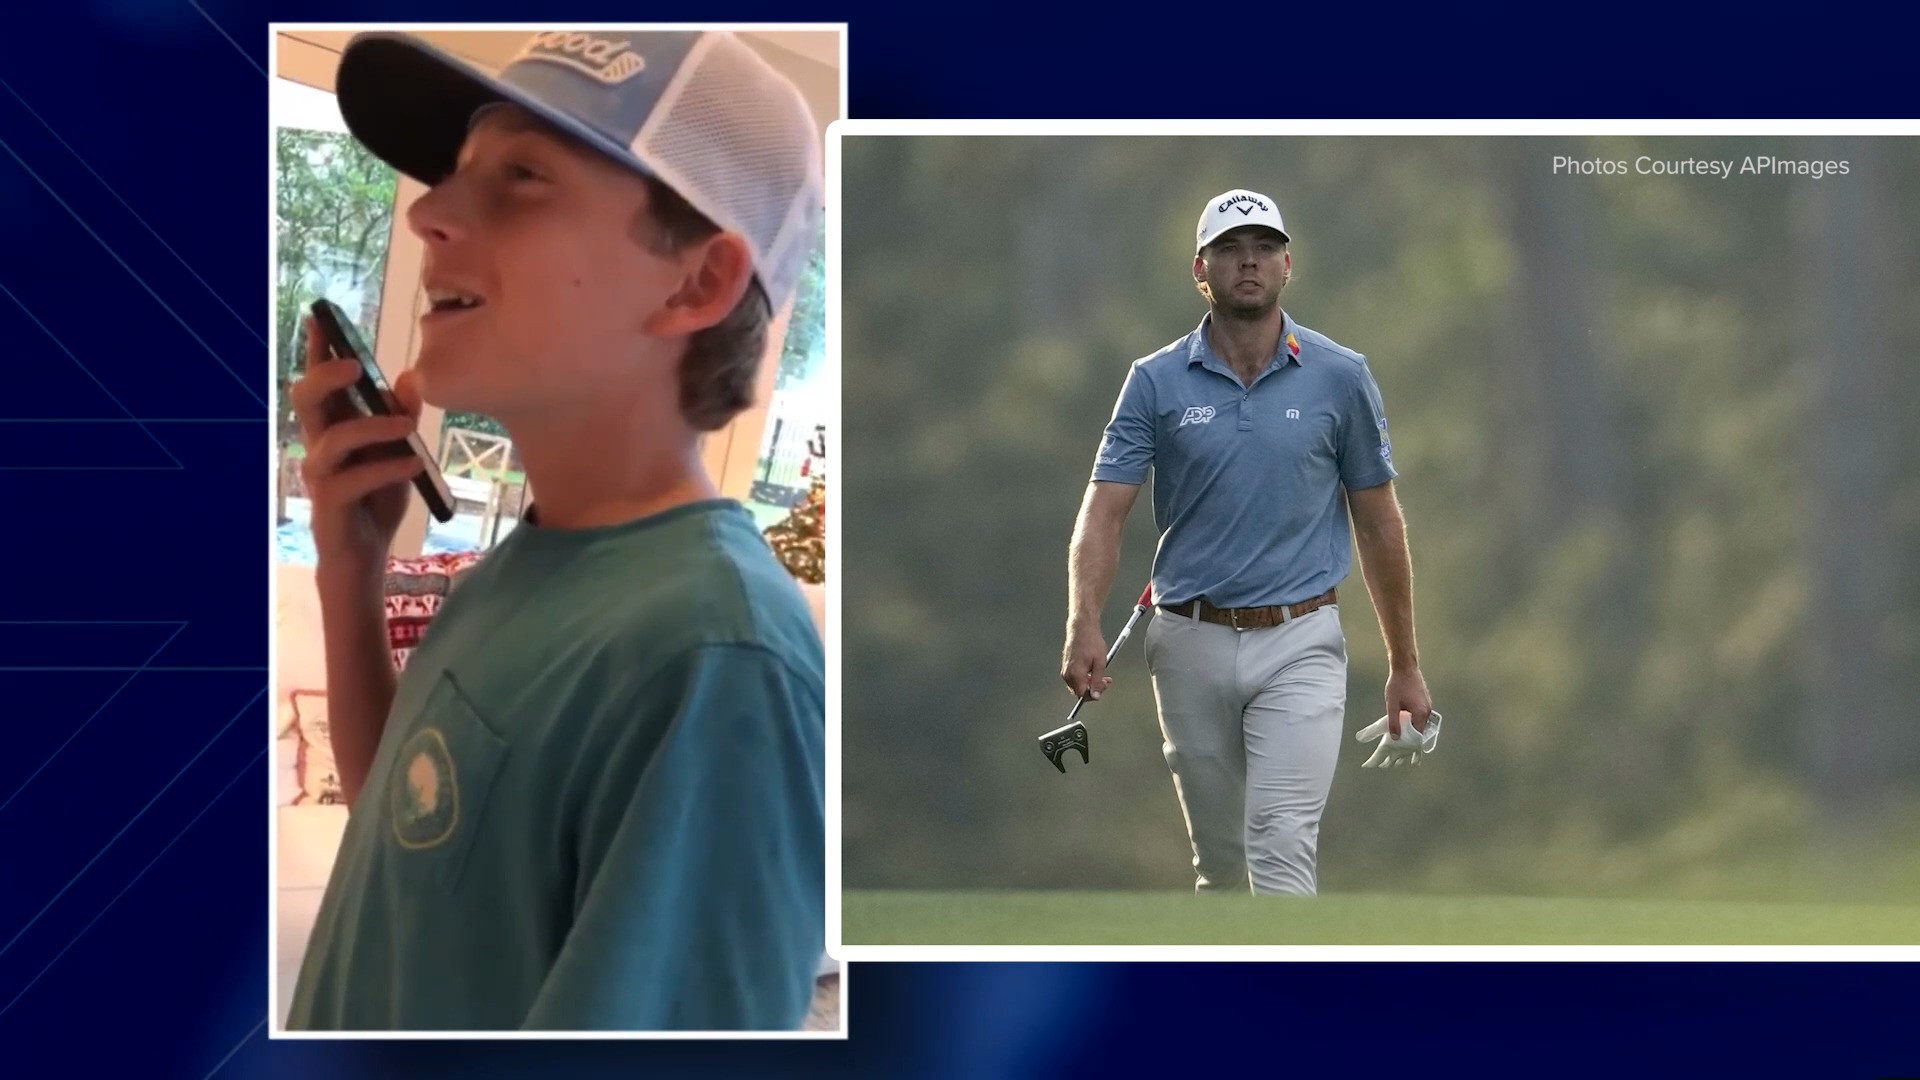 In the midst of loss, family finds hope with call from Sam Burns wwltv